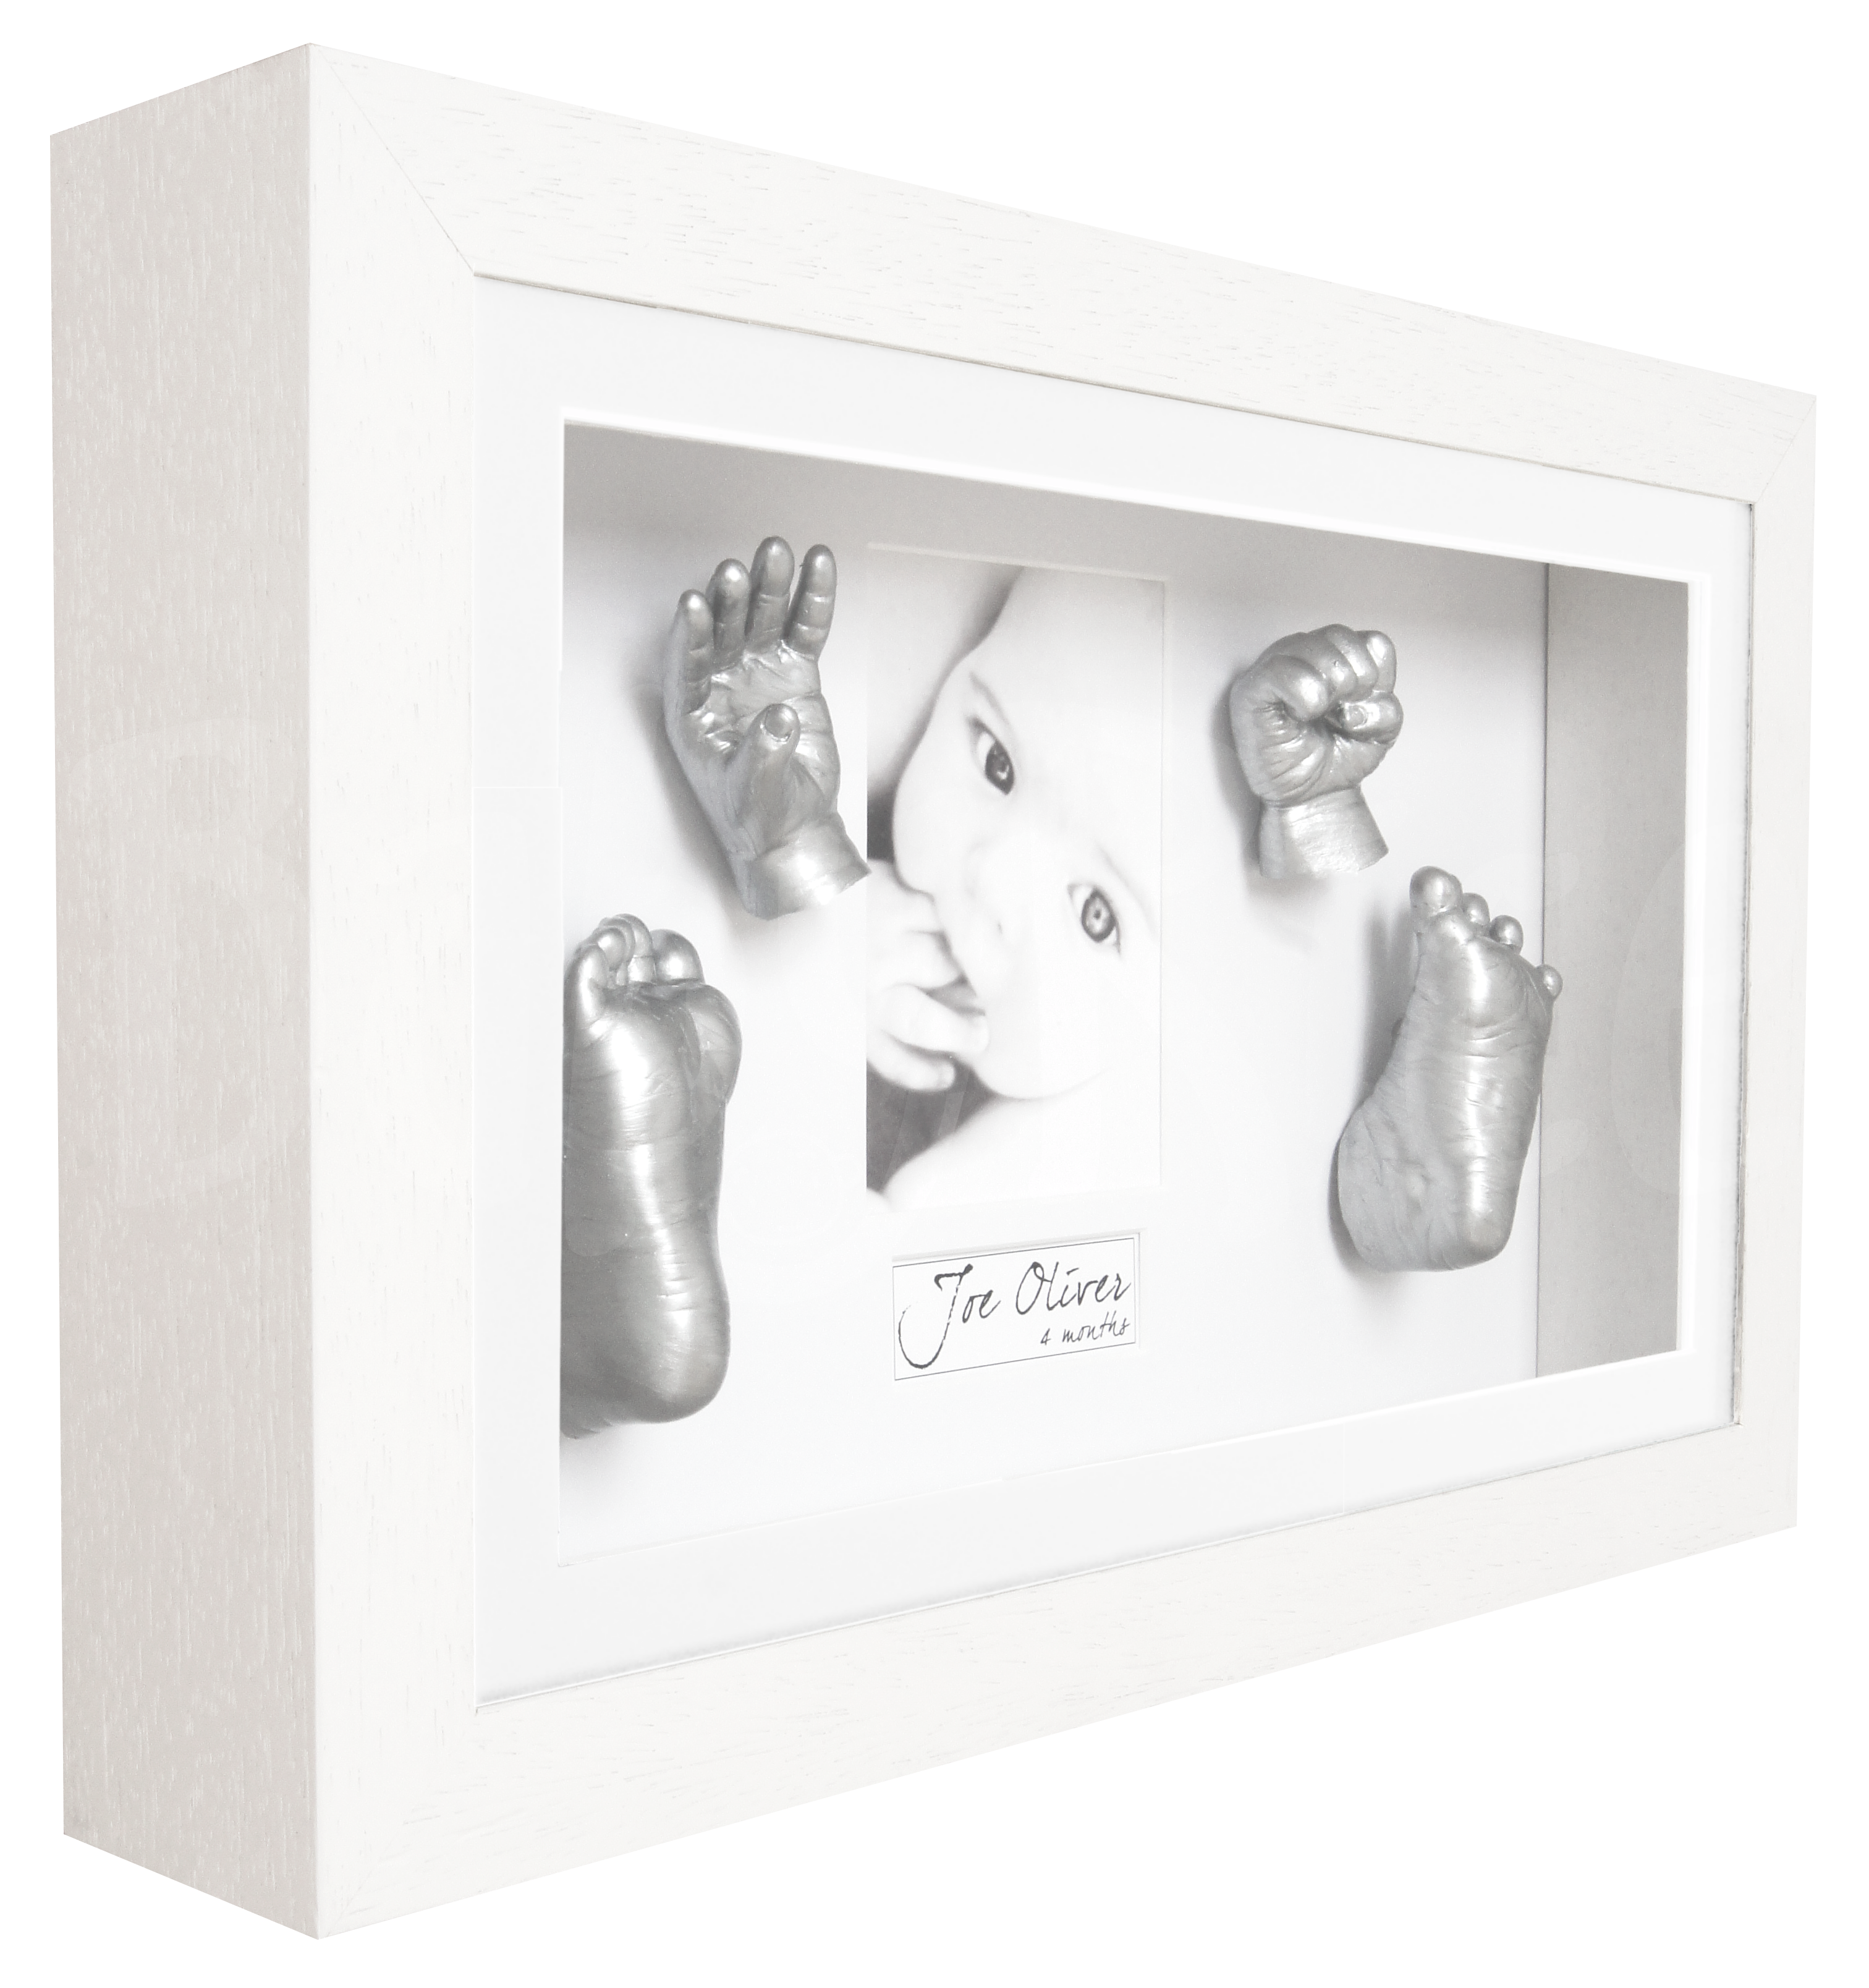 Unique baby gift hands and feet casting kit with white frame, silver paint